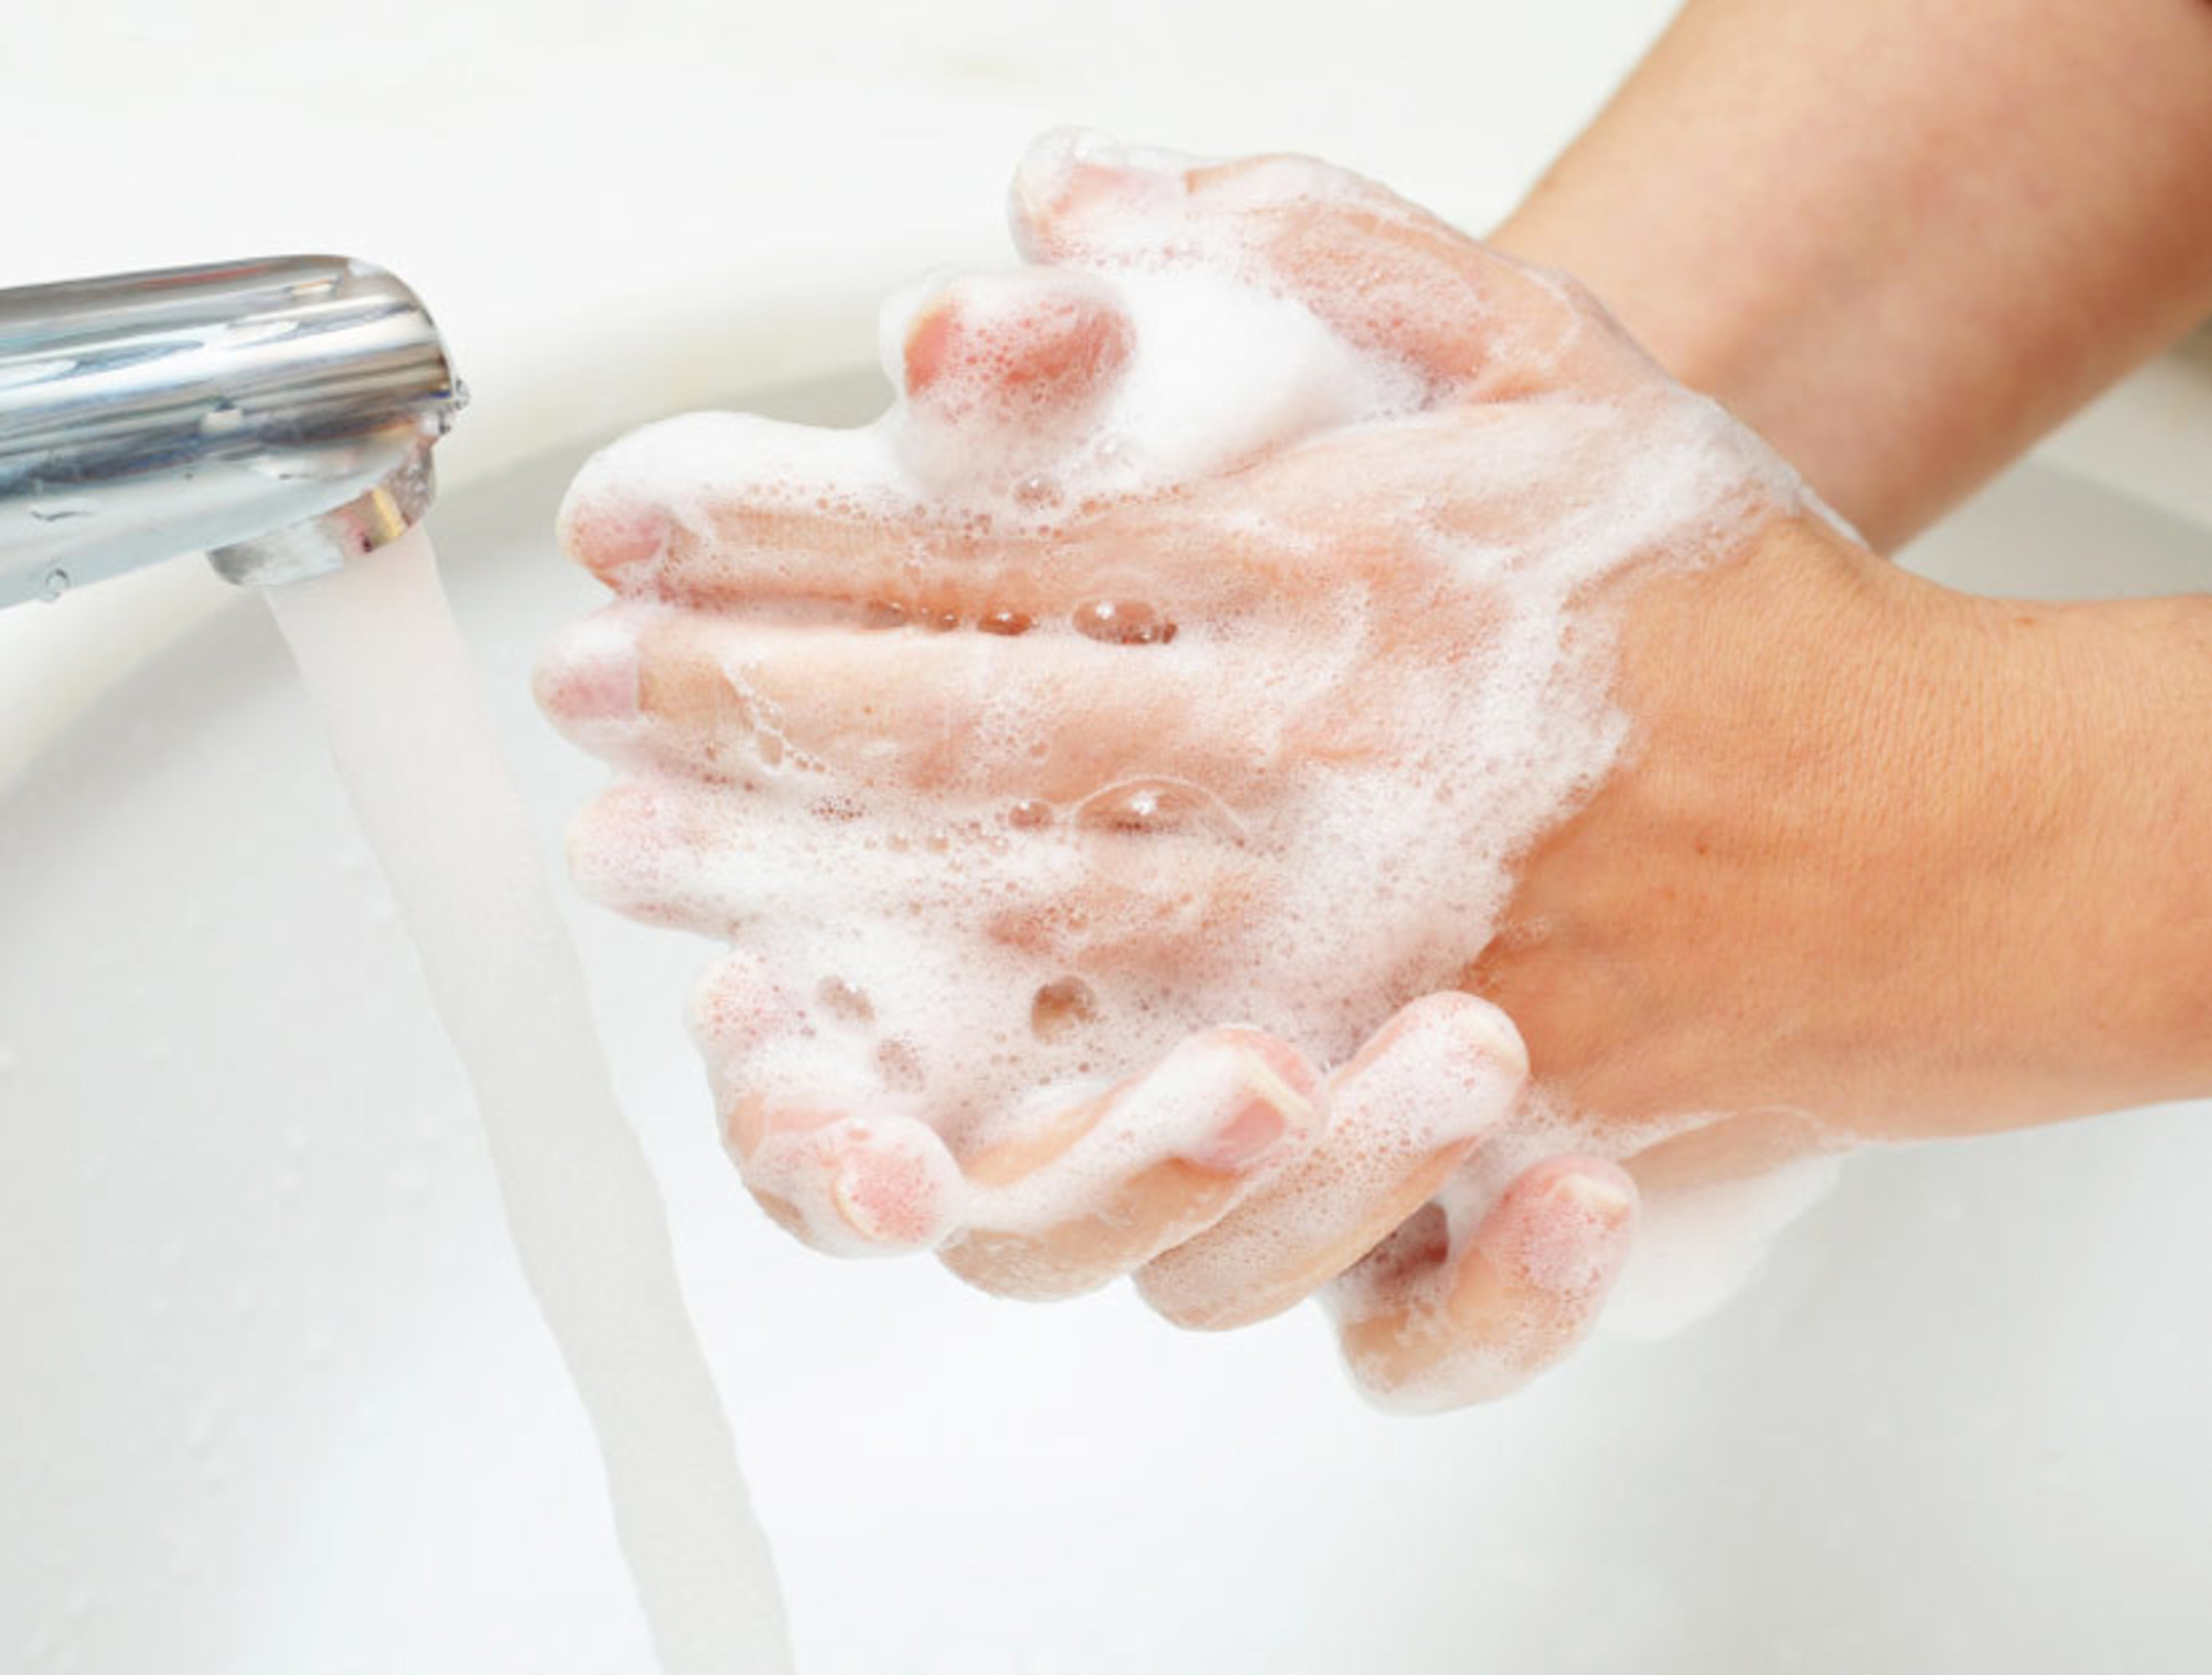 Bradley Corporation conducts an annual Healthy Hand Washing survey to keep its pulse on Americans' hand washing habits in public restrooms.